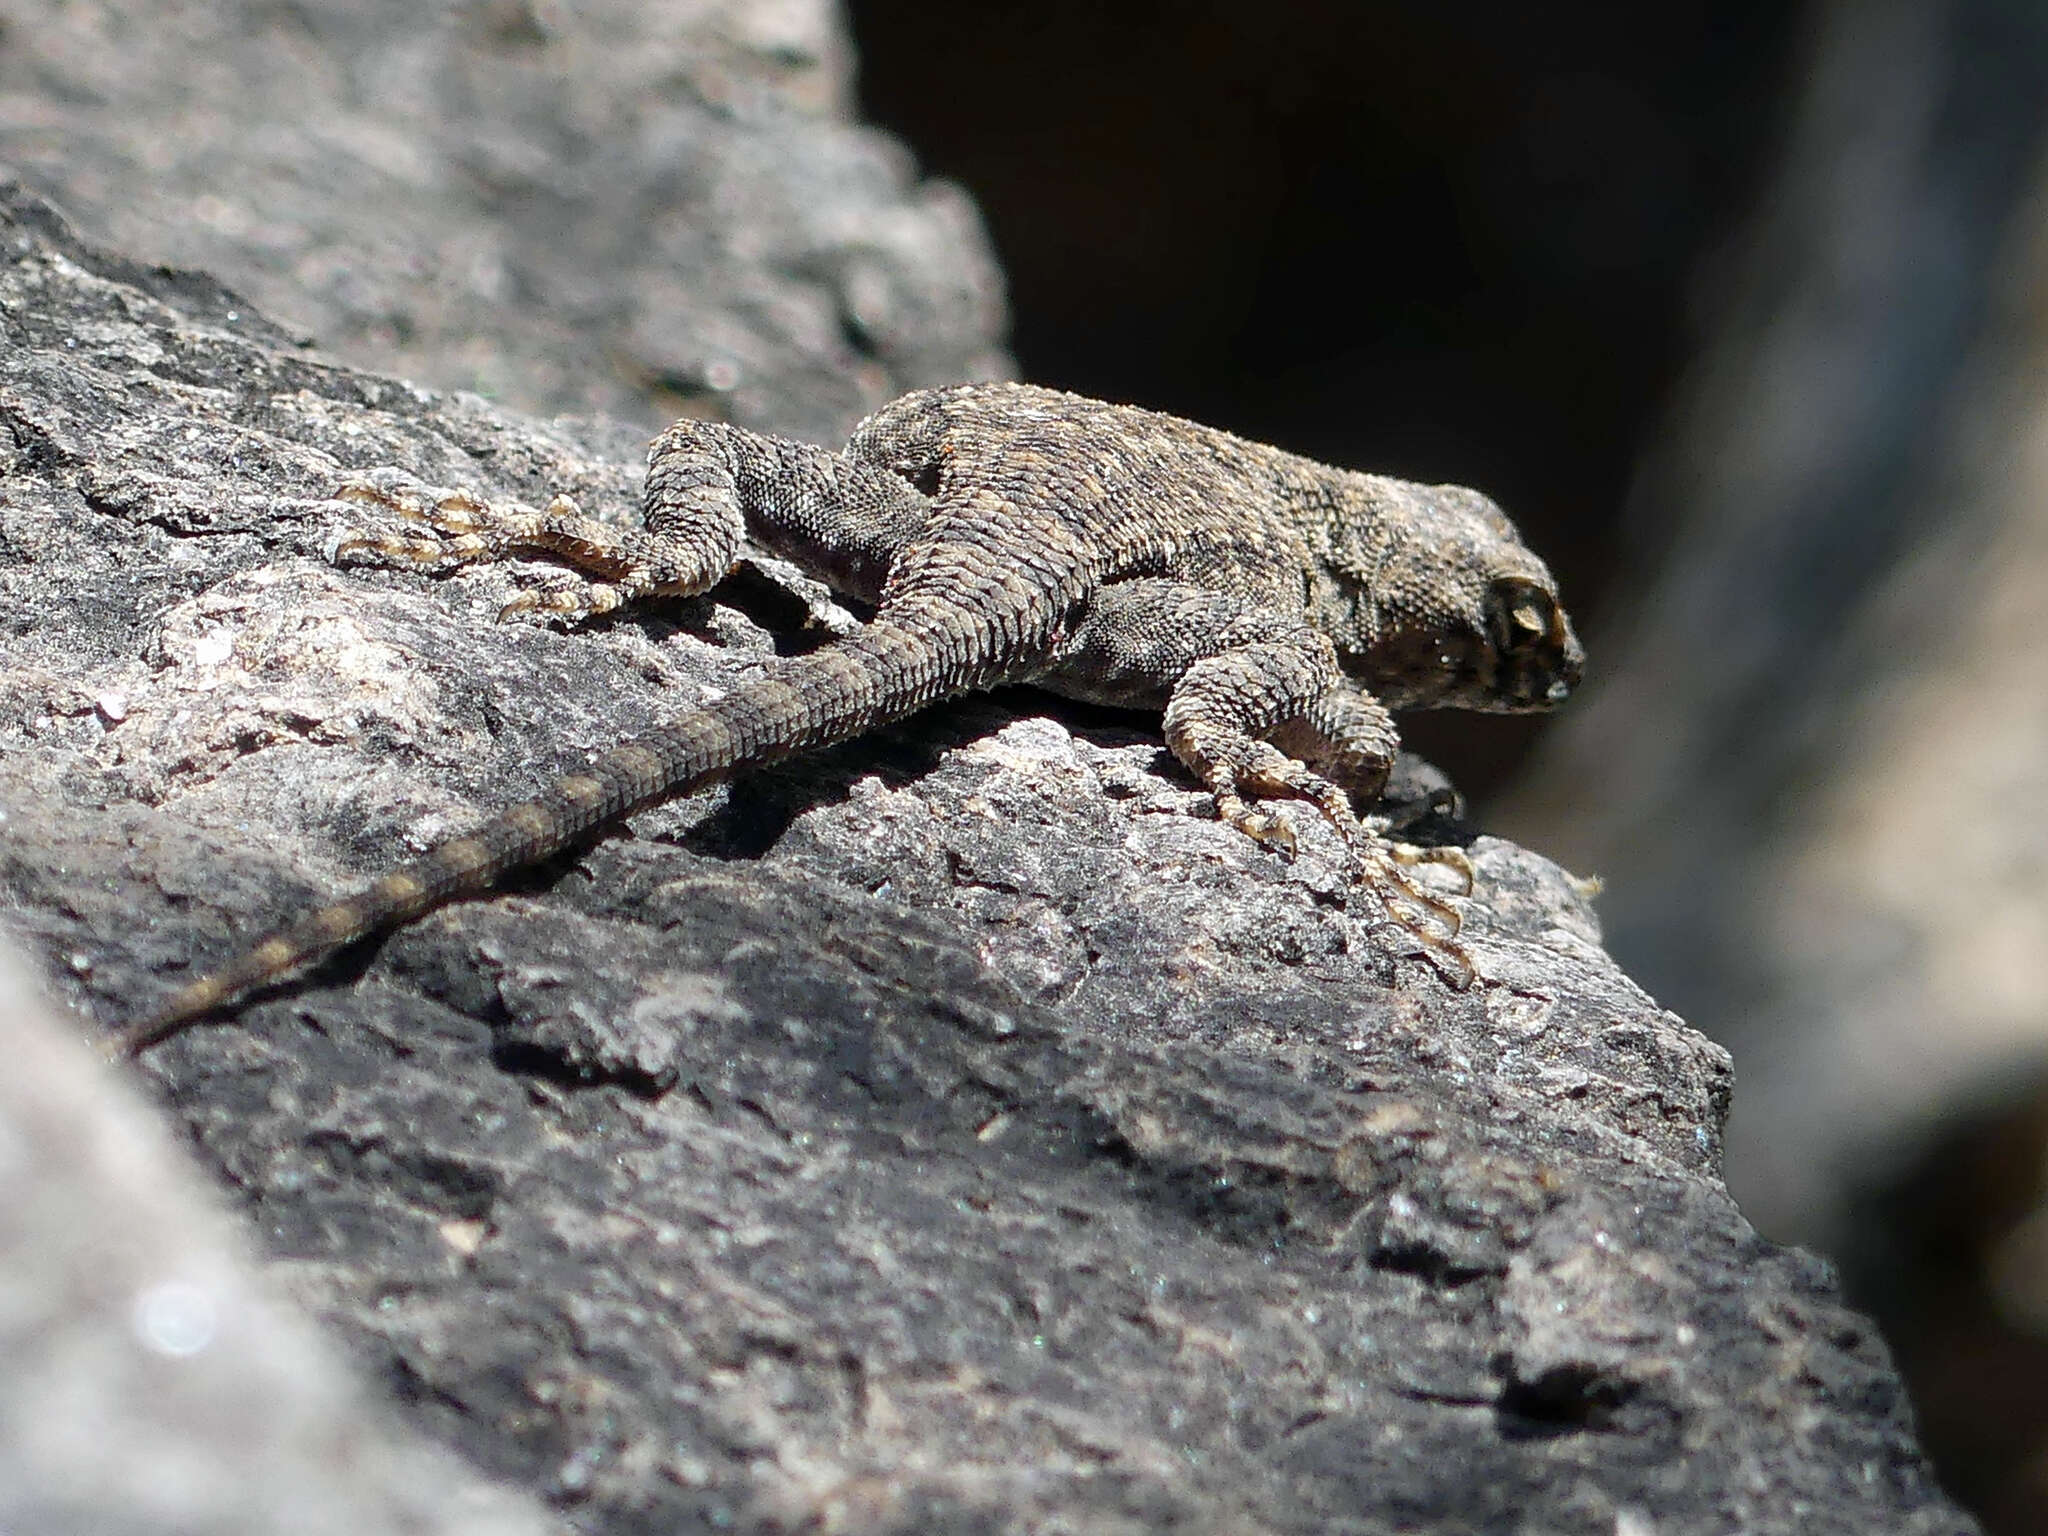 Image of Barred Spiny Lizard